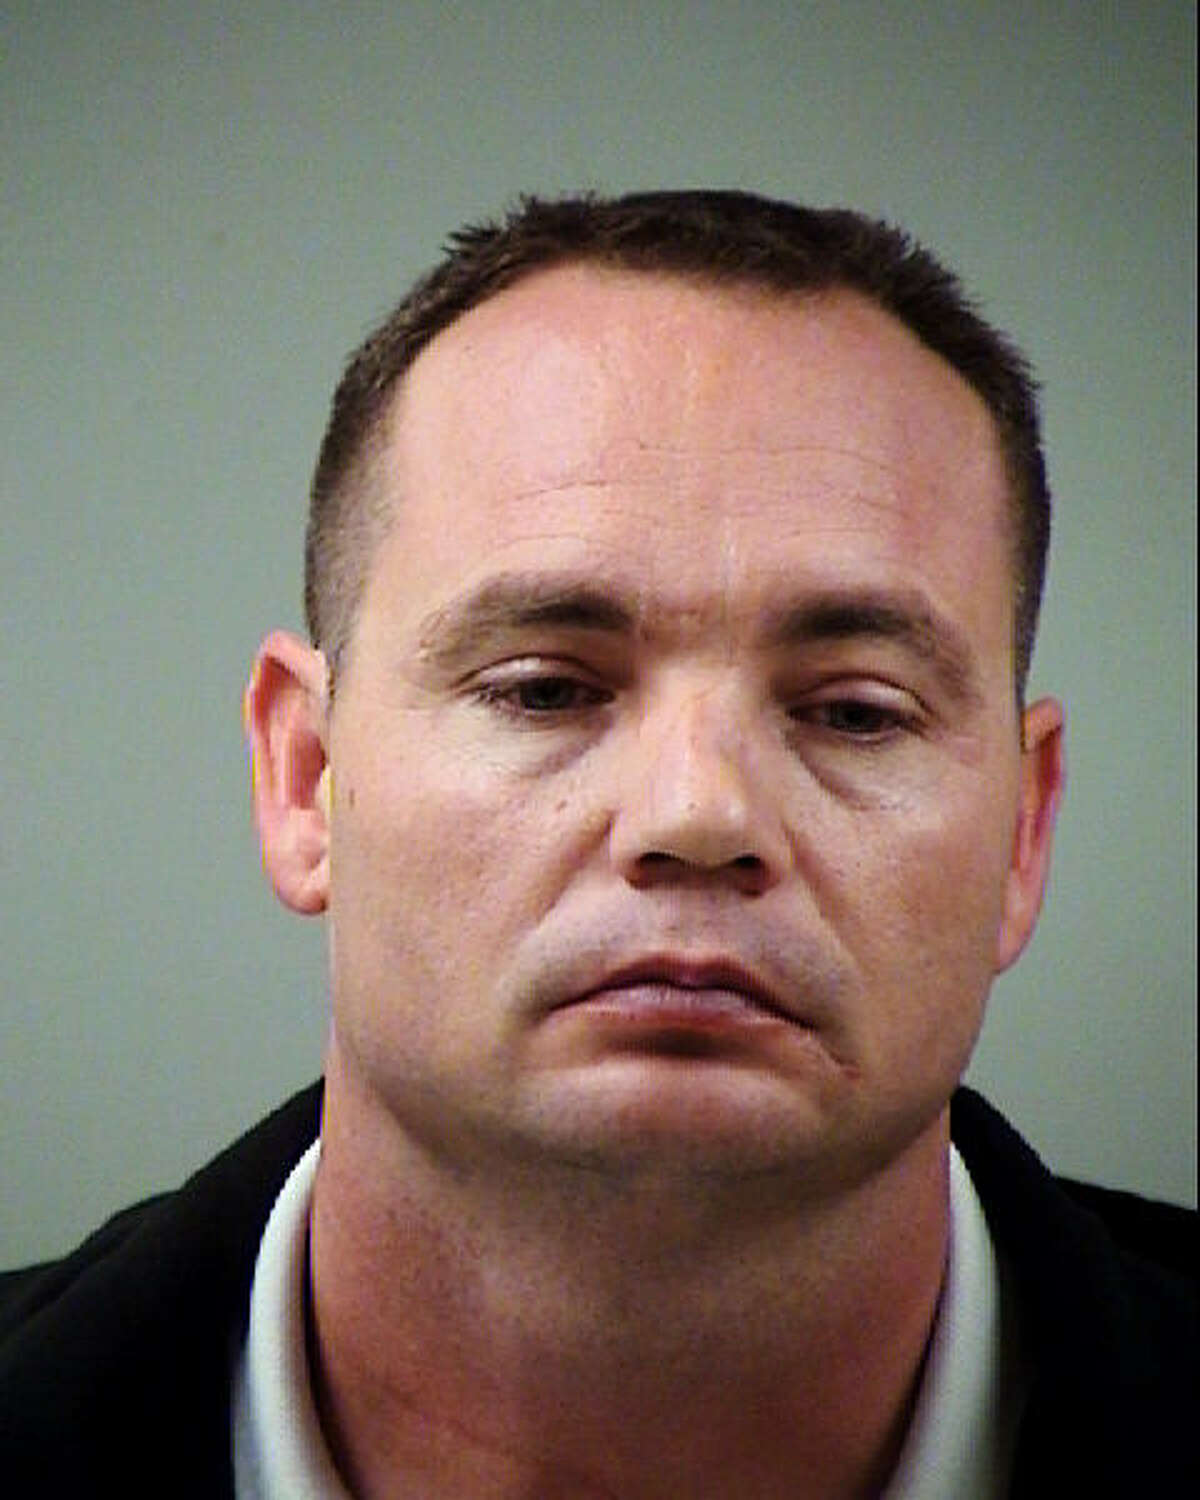 Policeman Jackie Len Neal is accused of raping a young woman in his patrol car.